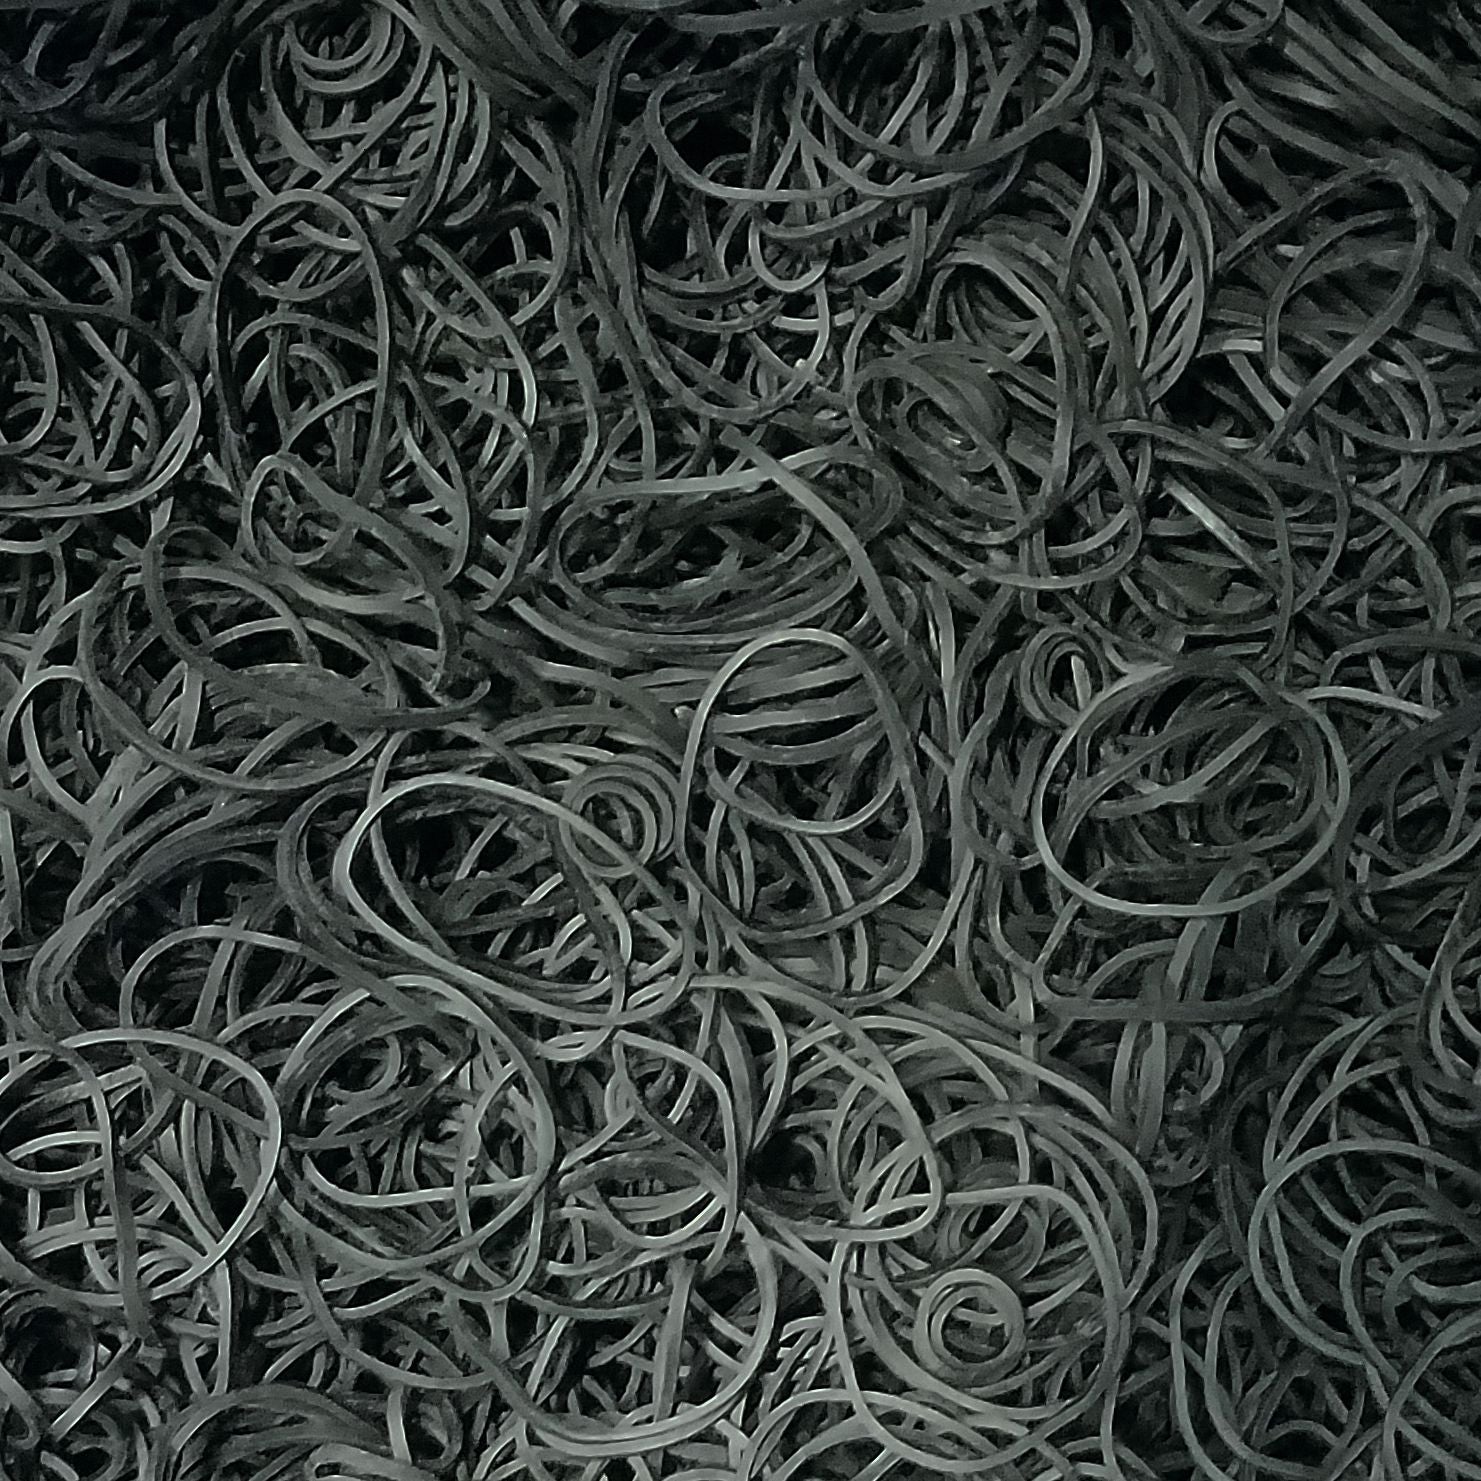 Black Rubber Bands-Thick Version